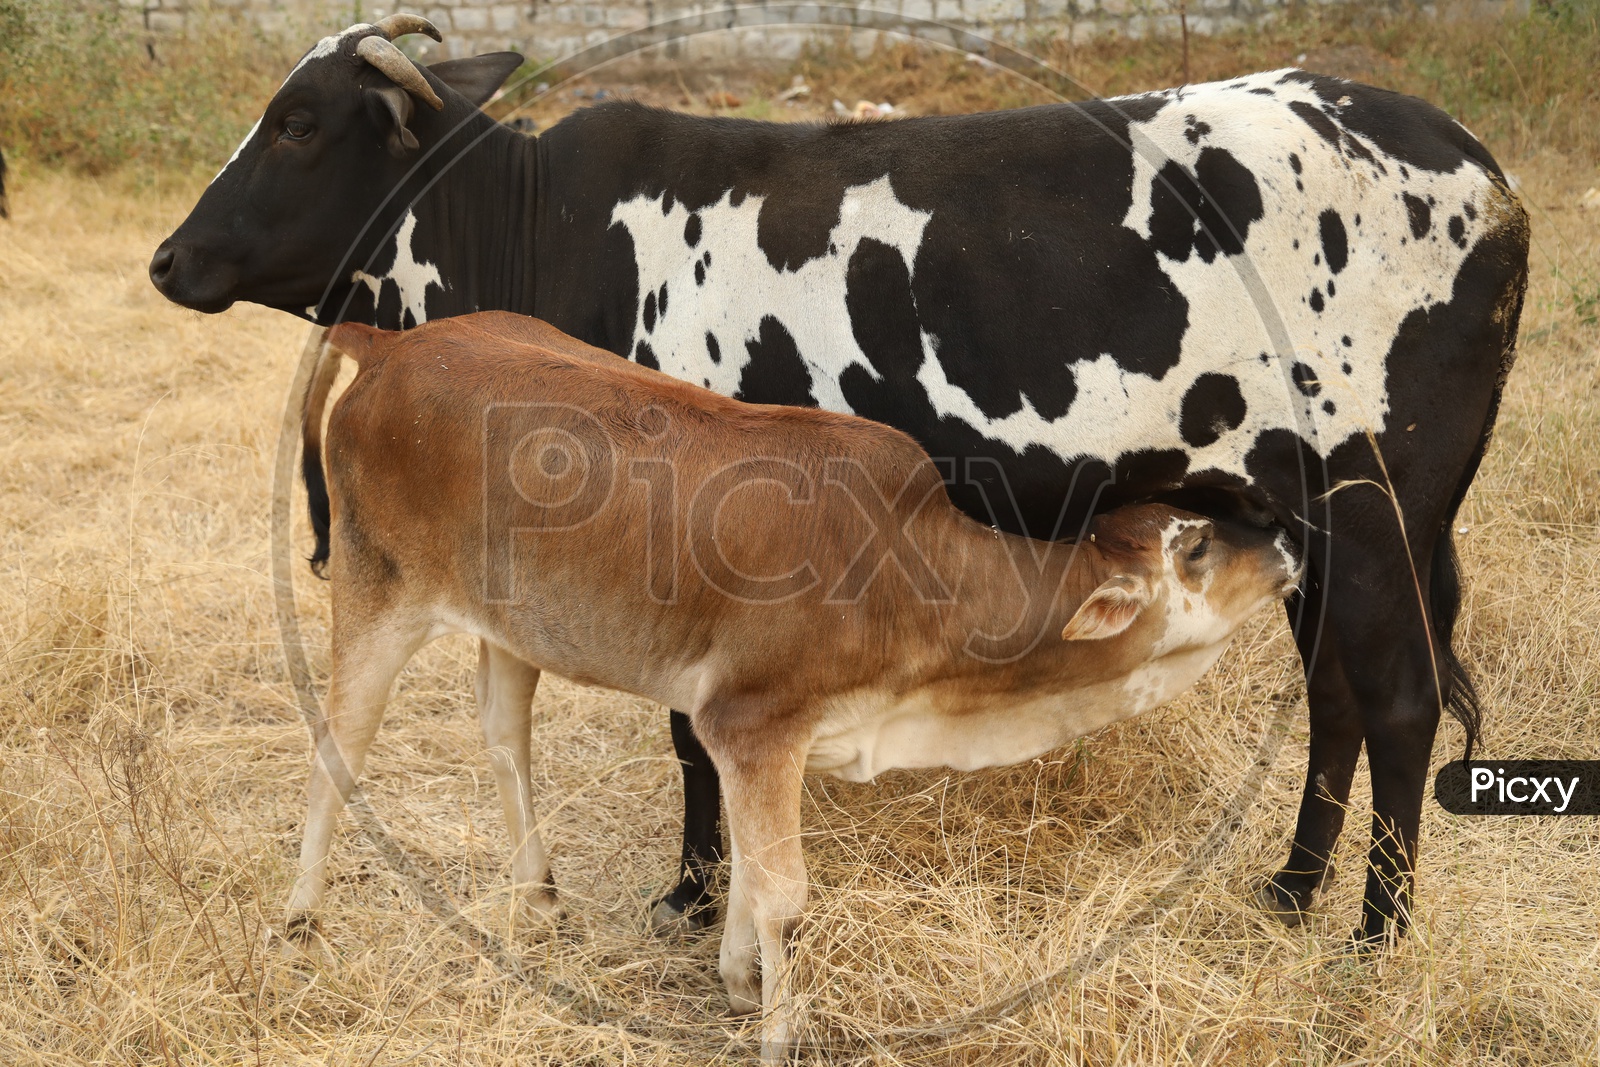 A calf drinking milk from mother cow